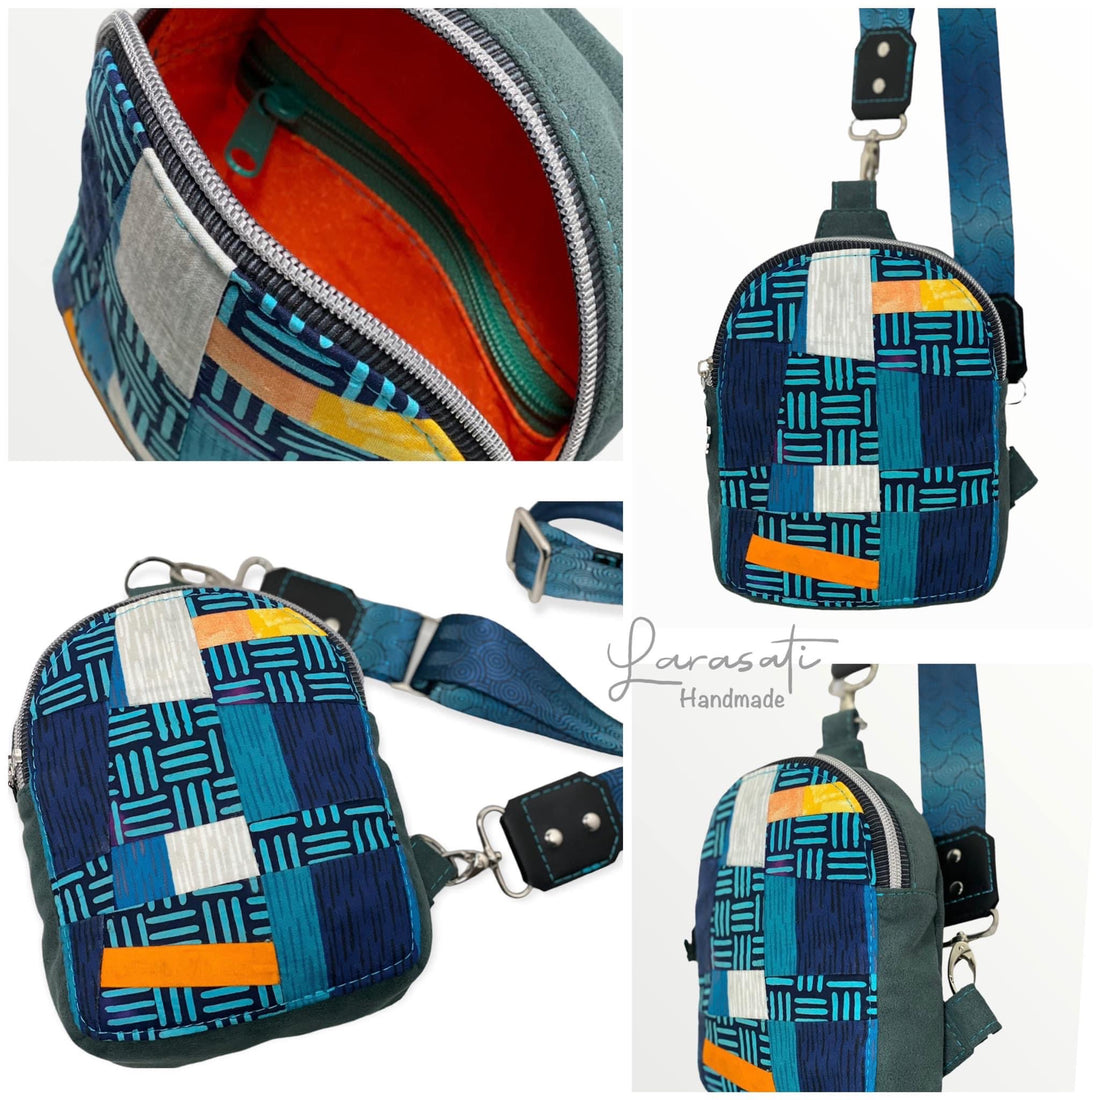 Mav Pack PDF Sewing Pattern (includes SVGs, A0 file, Projector